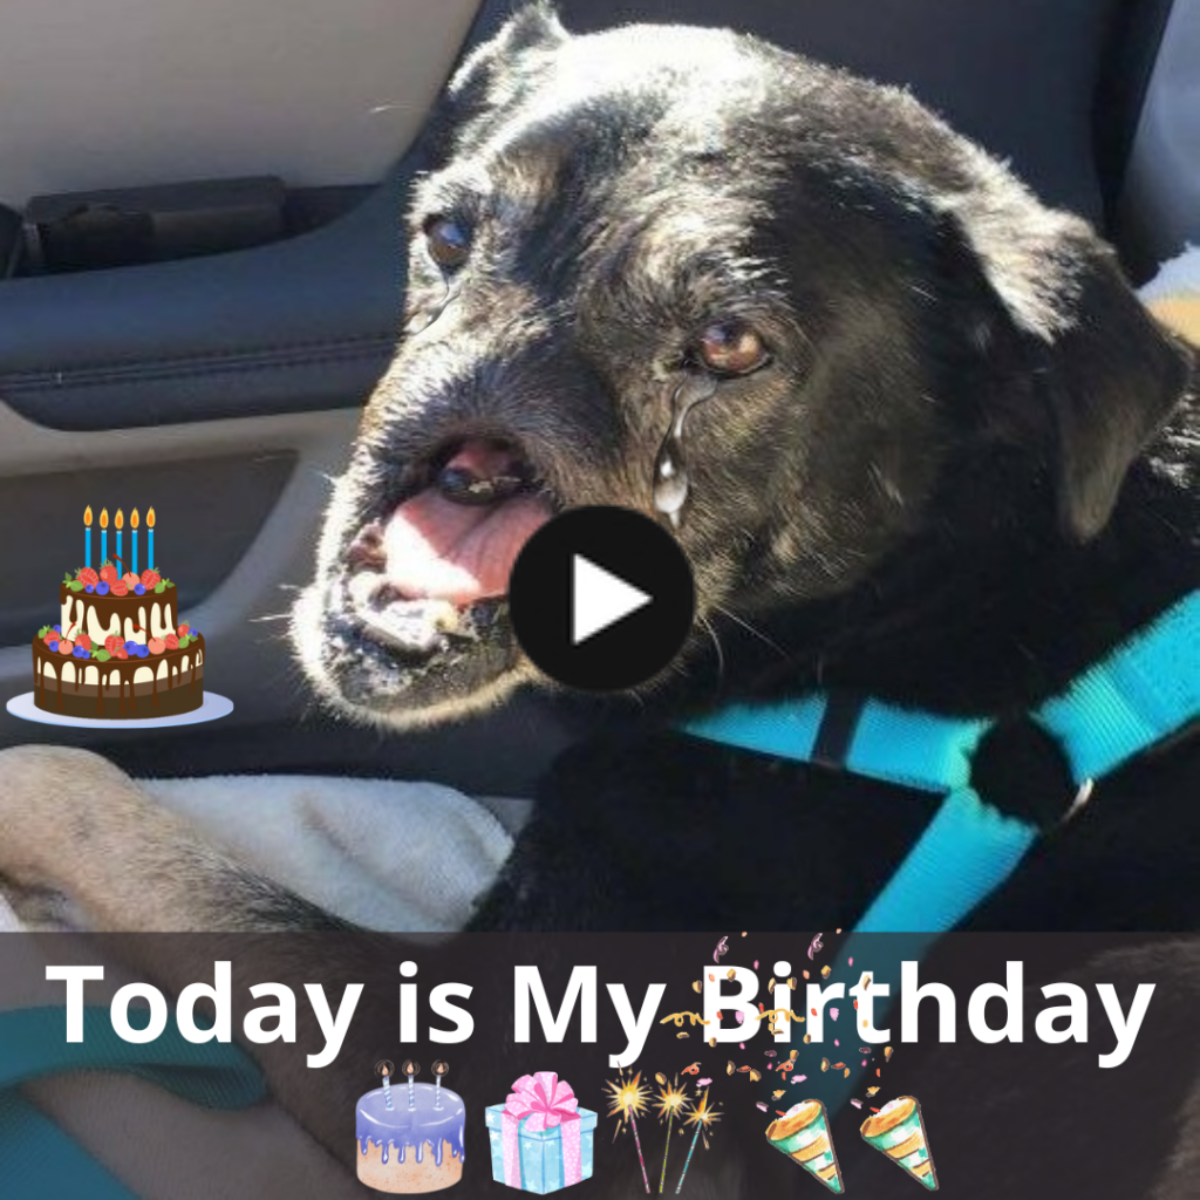 Today is the birthday of Anubis, a dog with difficulty eating due to injuries, who survived wandering the streets of Cairo. Hopefully the pain can be somewhat eased through wishes from everyone